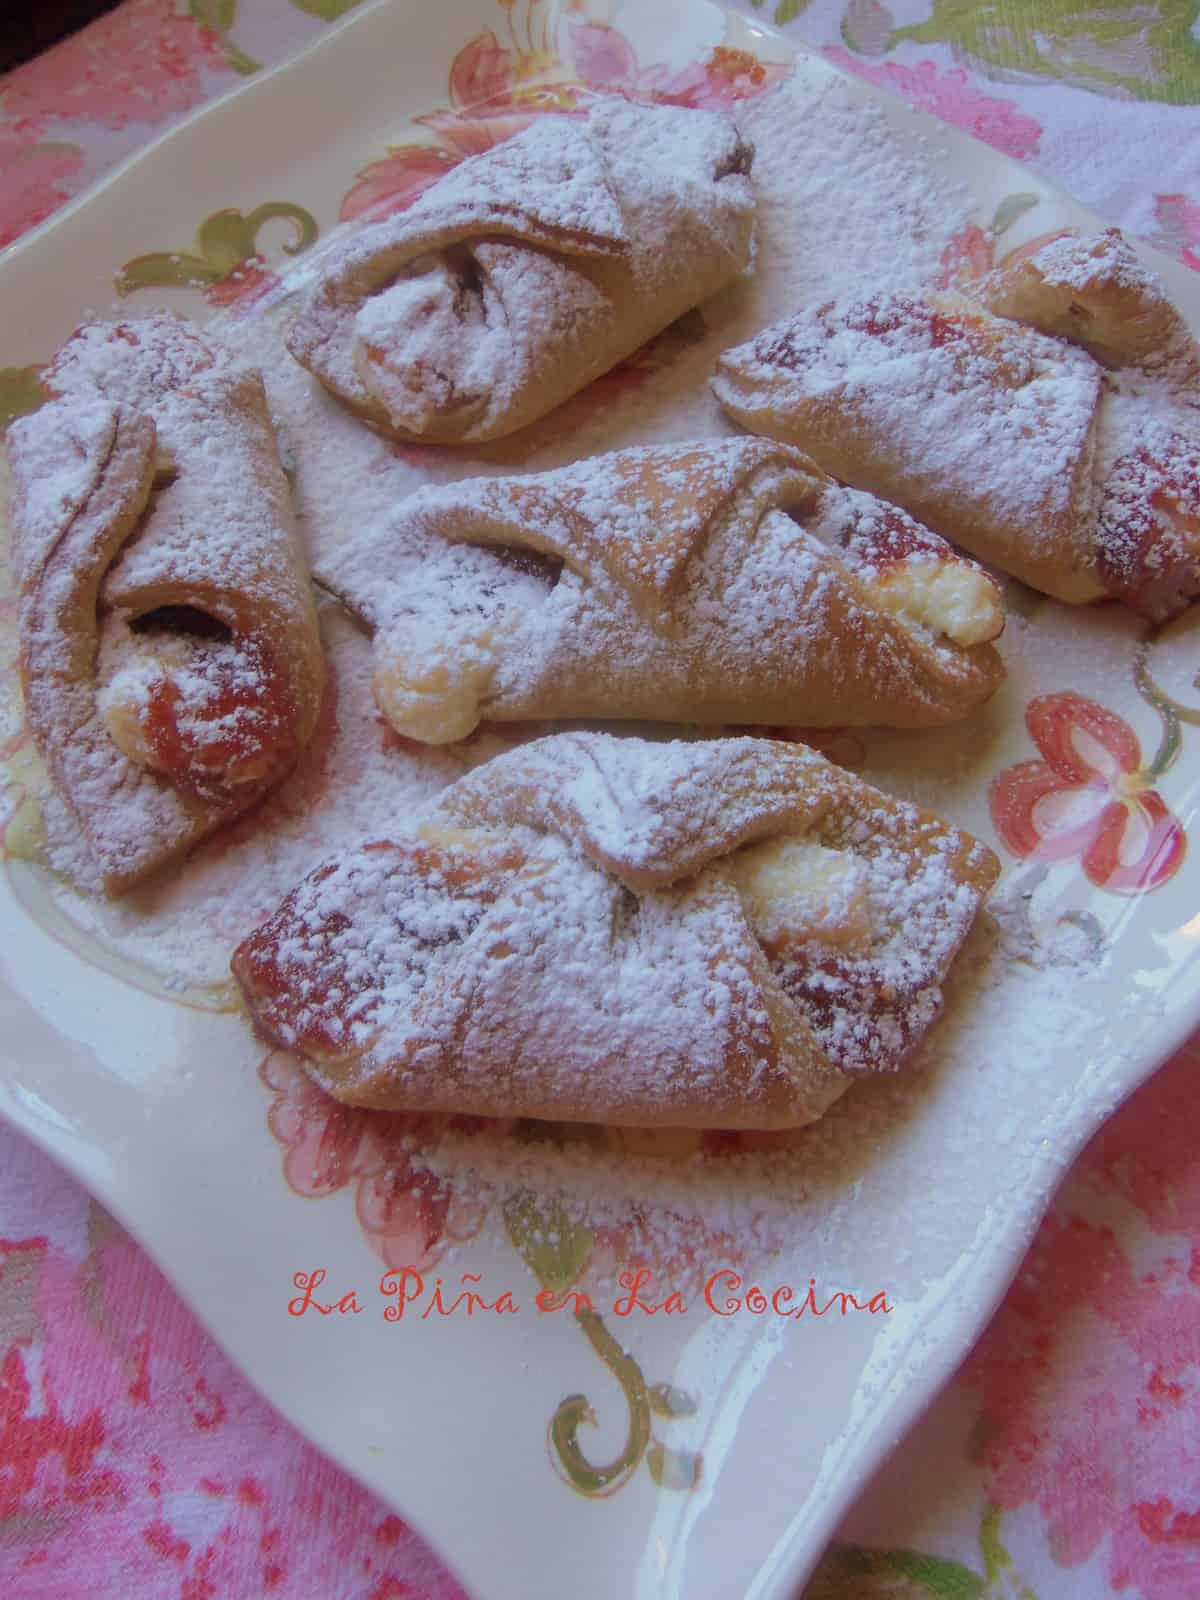 Quesitos filled with guava and sweetened cream cheese. Often prepared with puff pastry, but I had a little bit of a sweet yeast dough leftover from a previous recipe that worked well. This recipe was adapted from TheNoshery.com